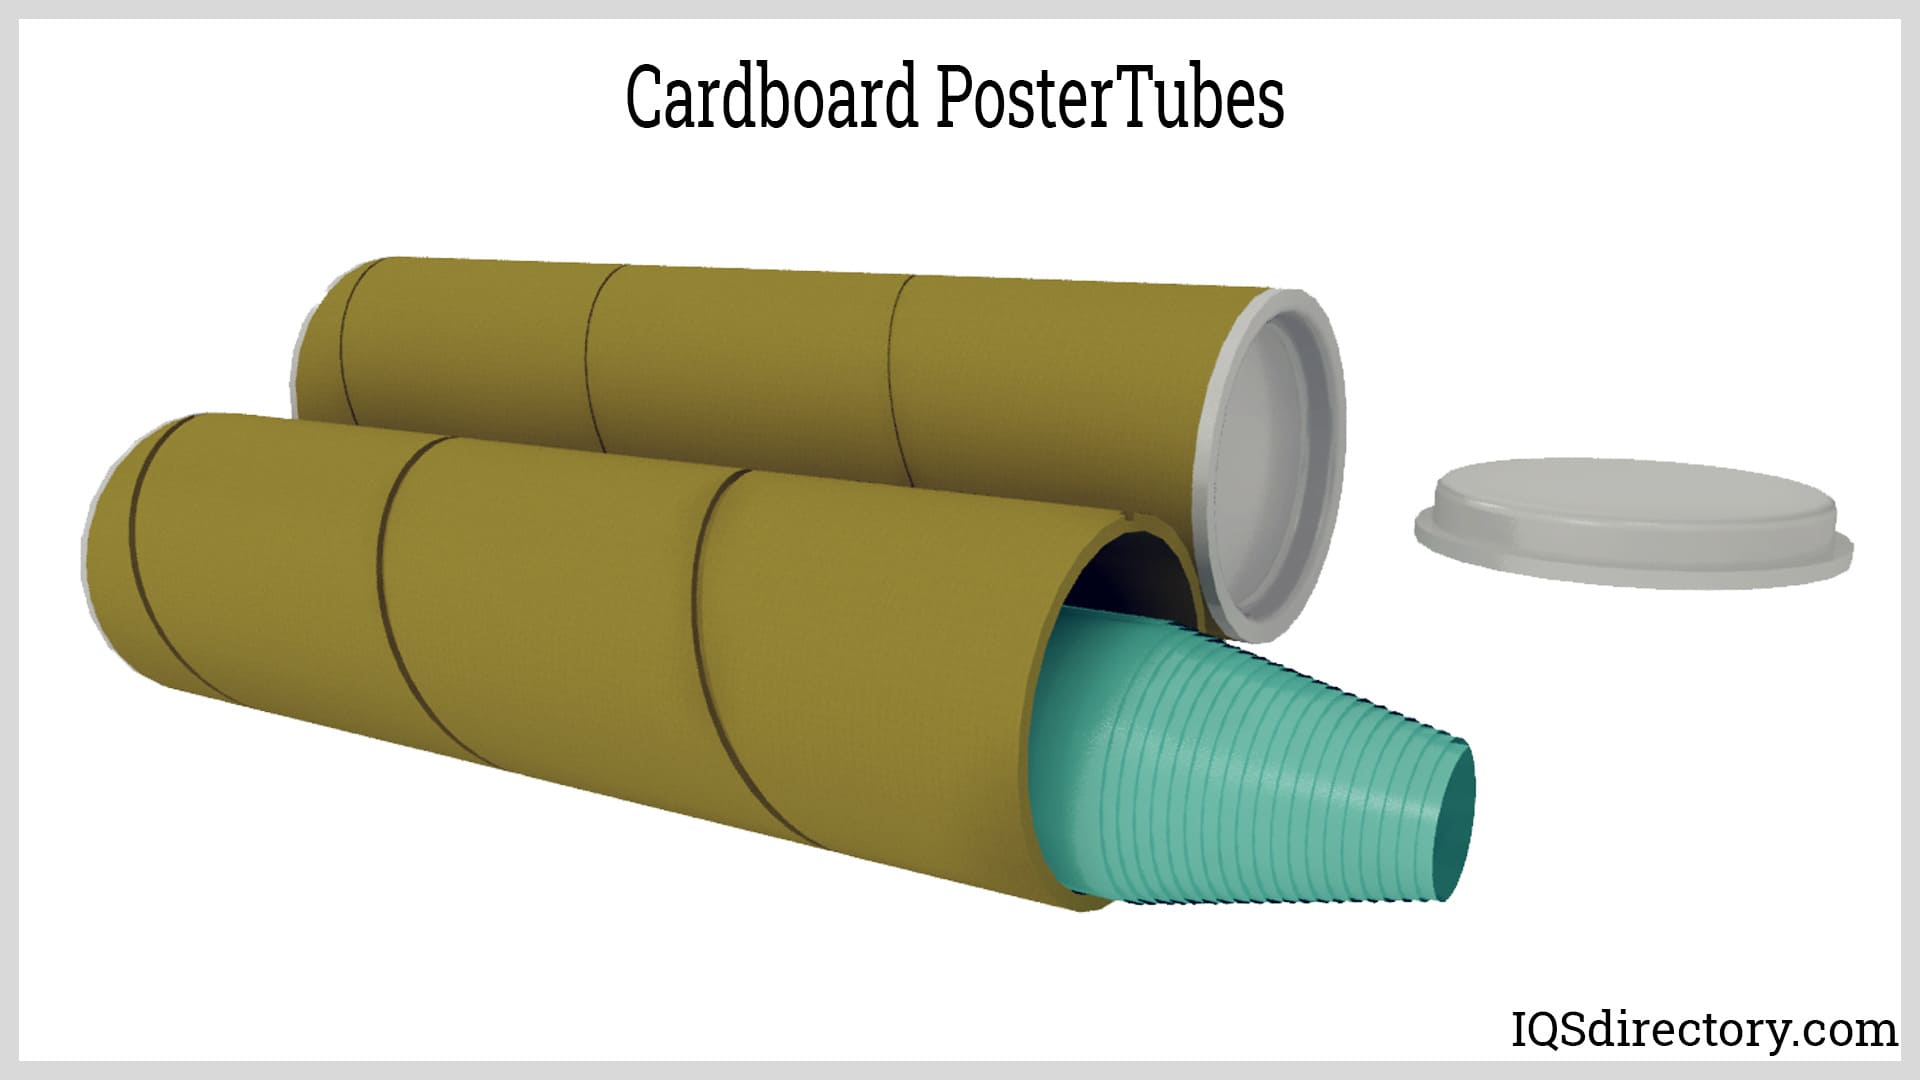 Expandable Poster Tube with Strap for Posters, Documents, Artwork